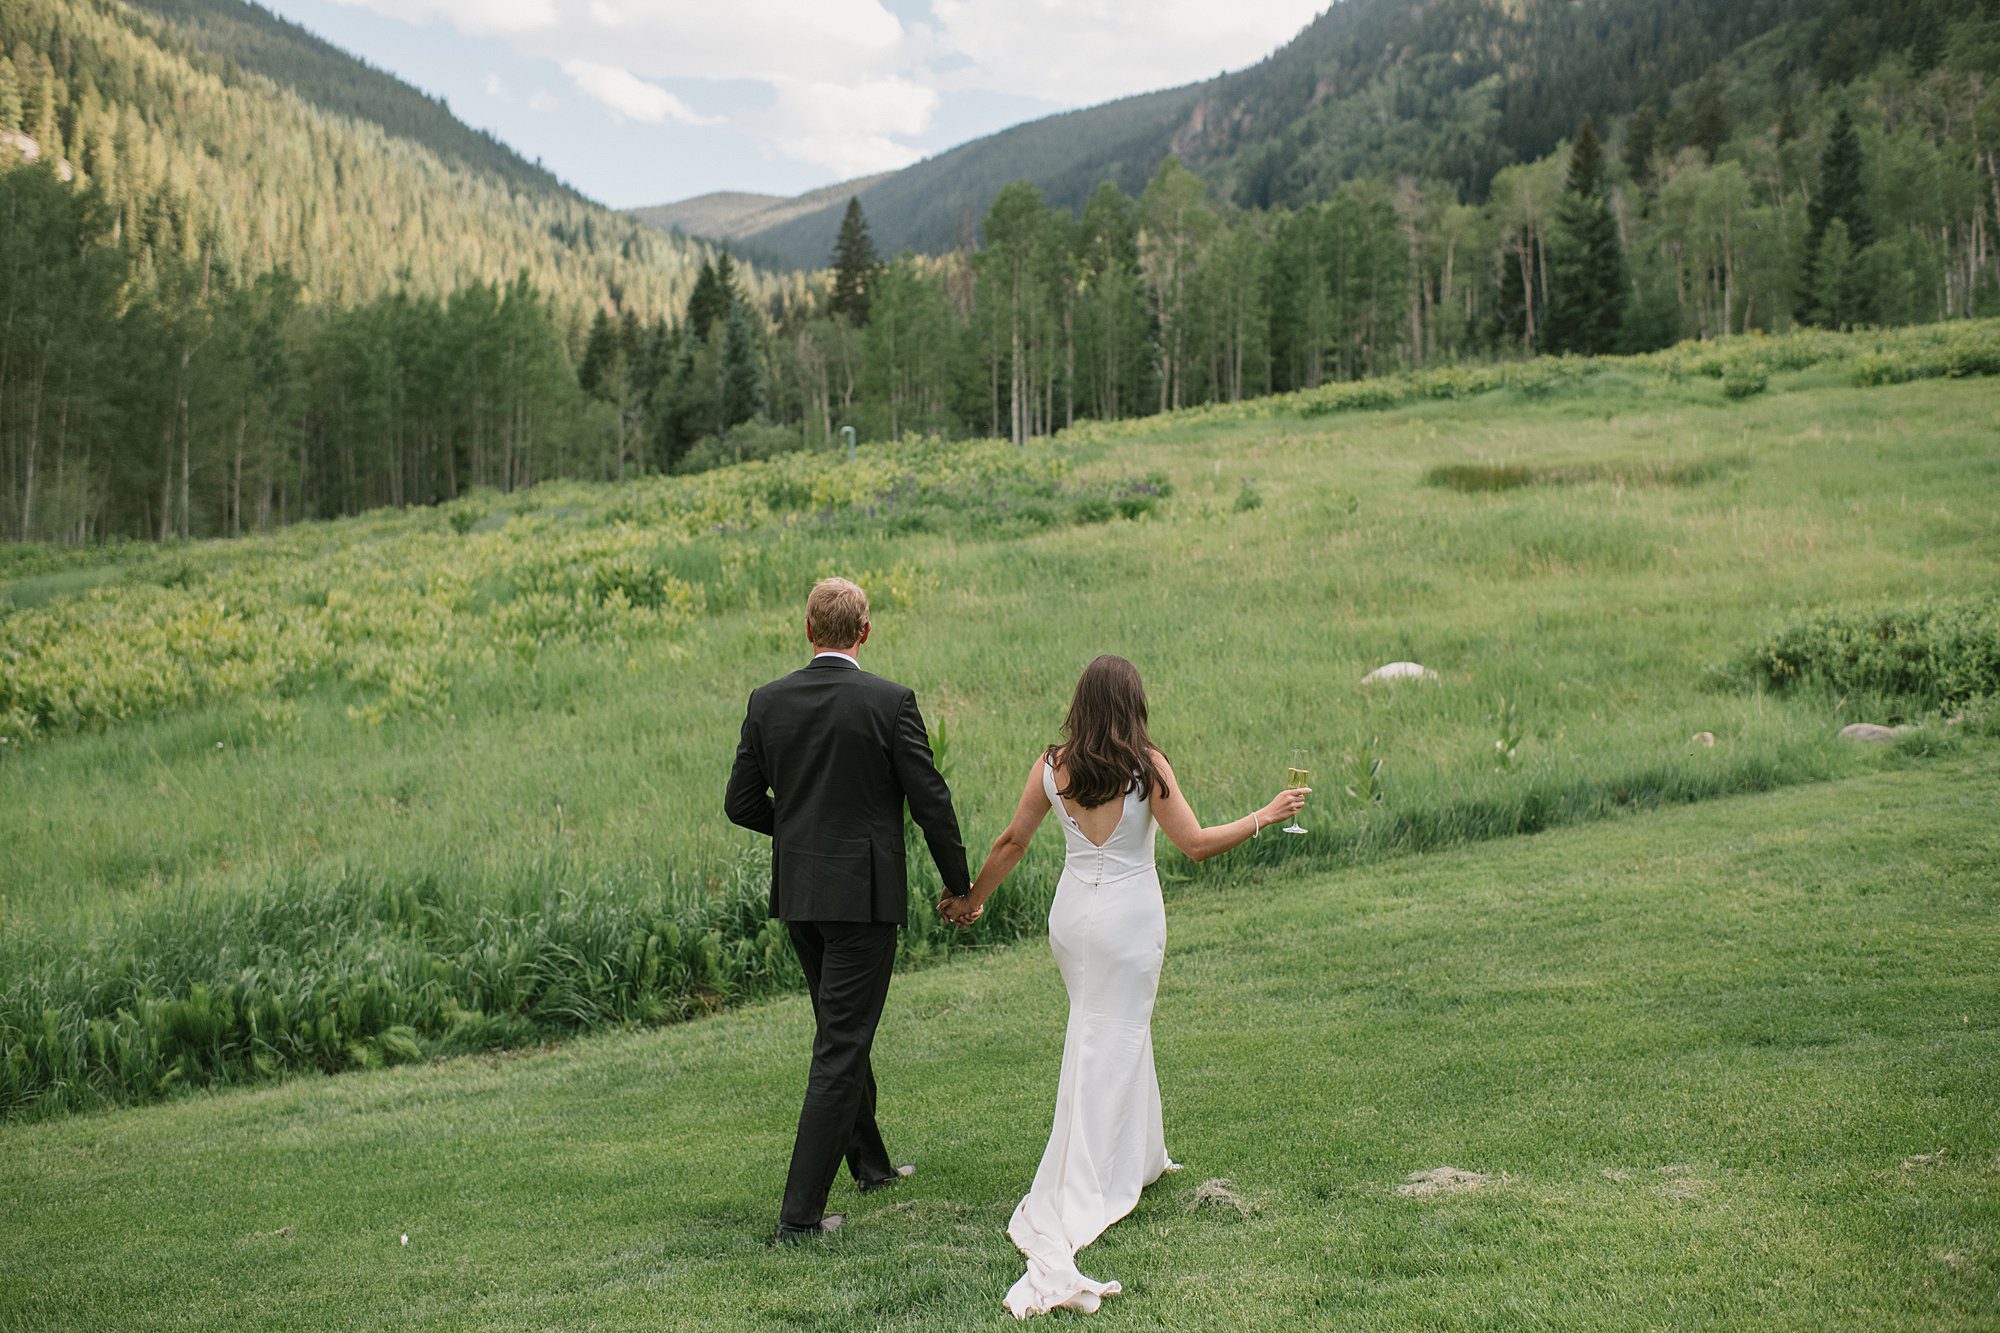 A bride and groom enjoy the scenery at Beano's Cabin after the intimate Beaver Creek wedding